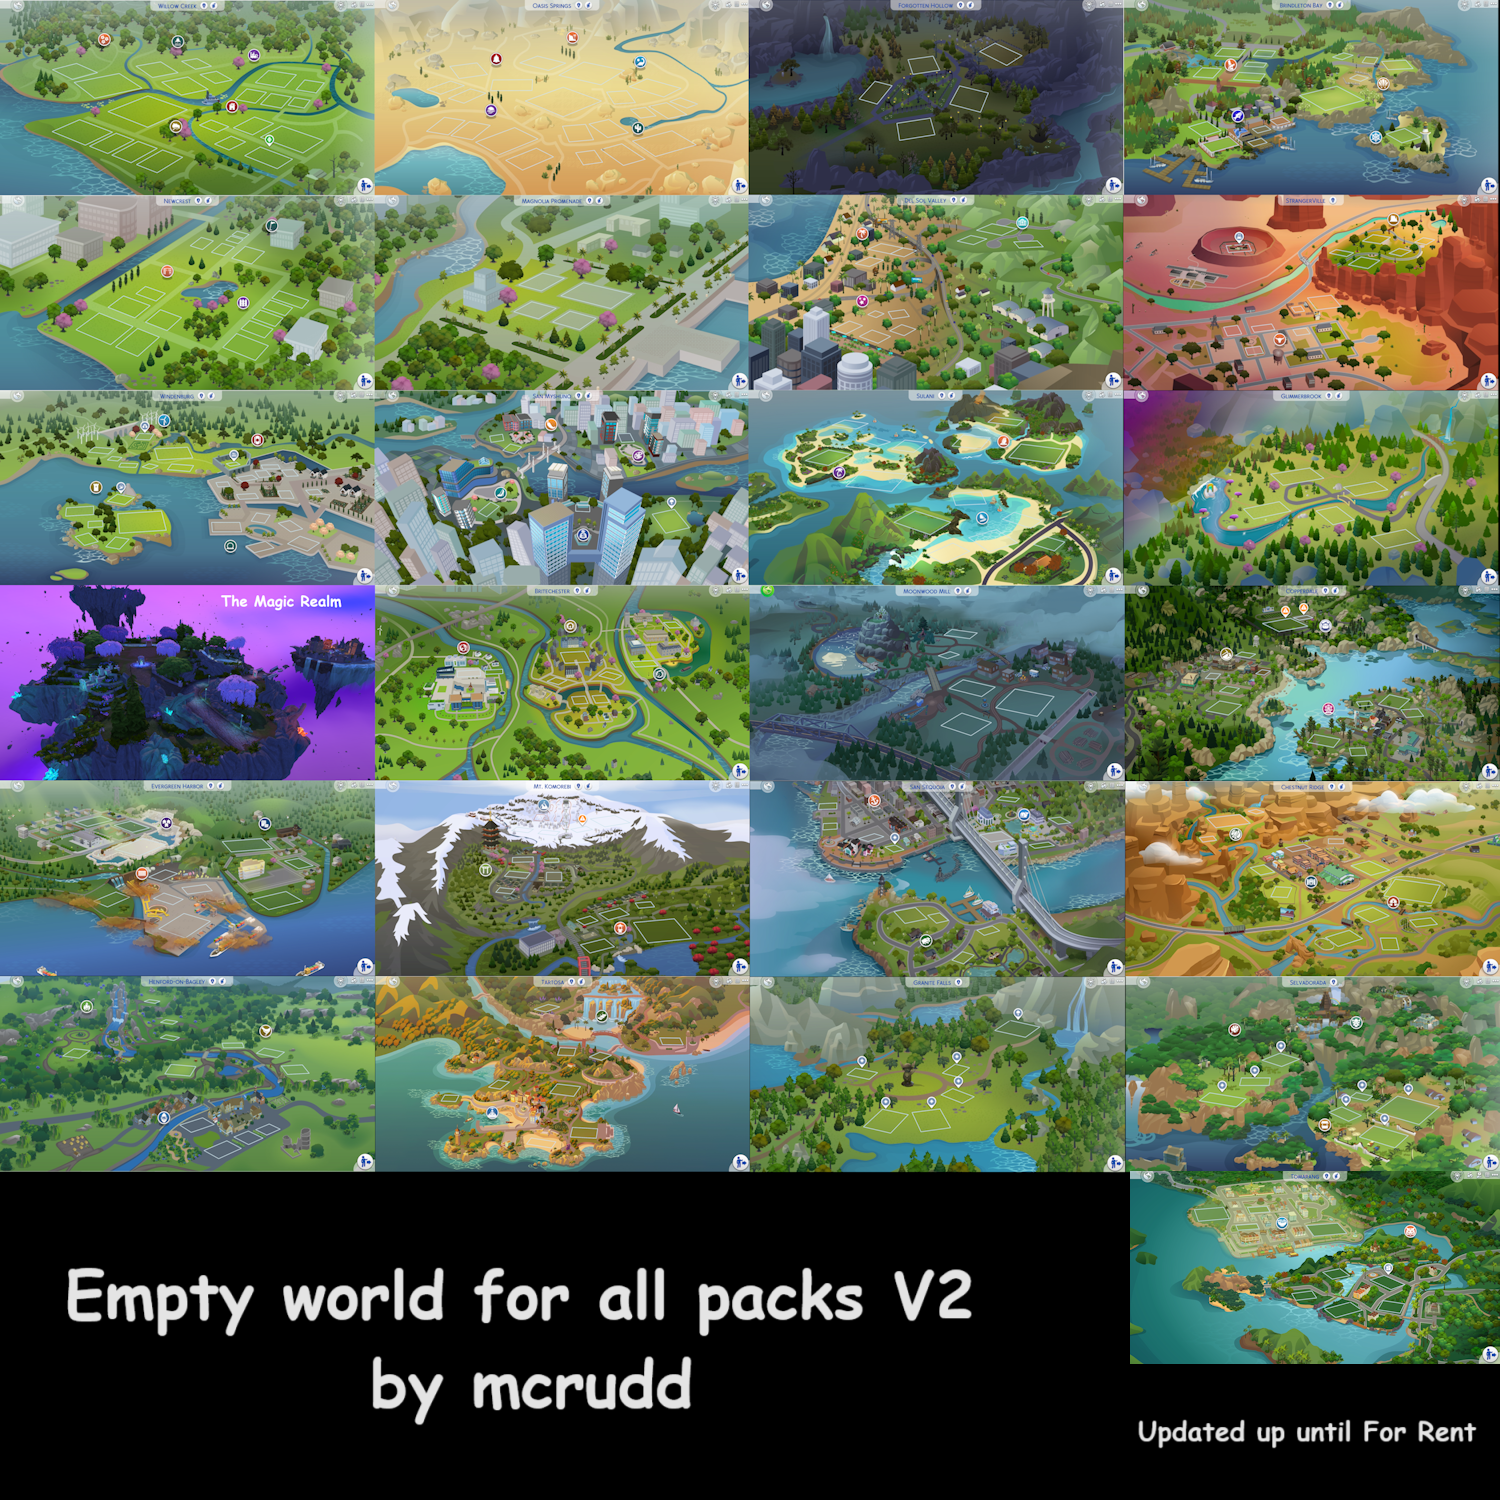 Empty worlds for all packs V2 project avatar